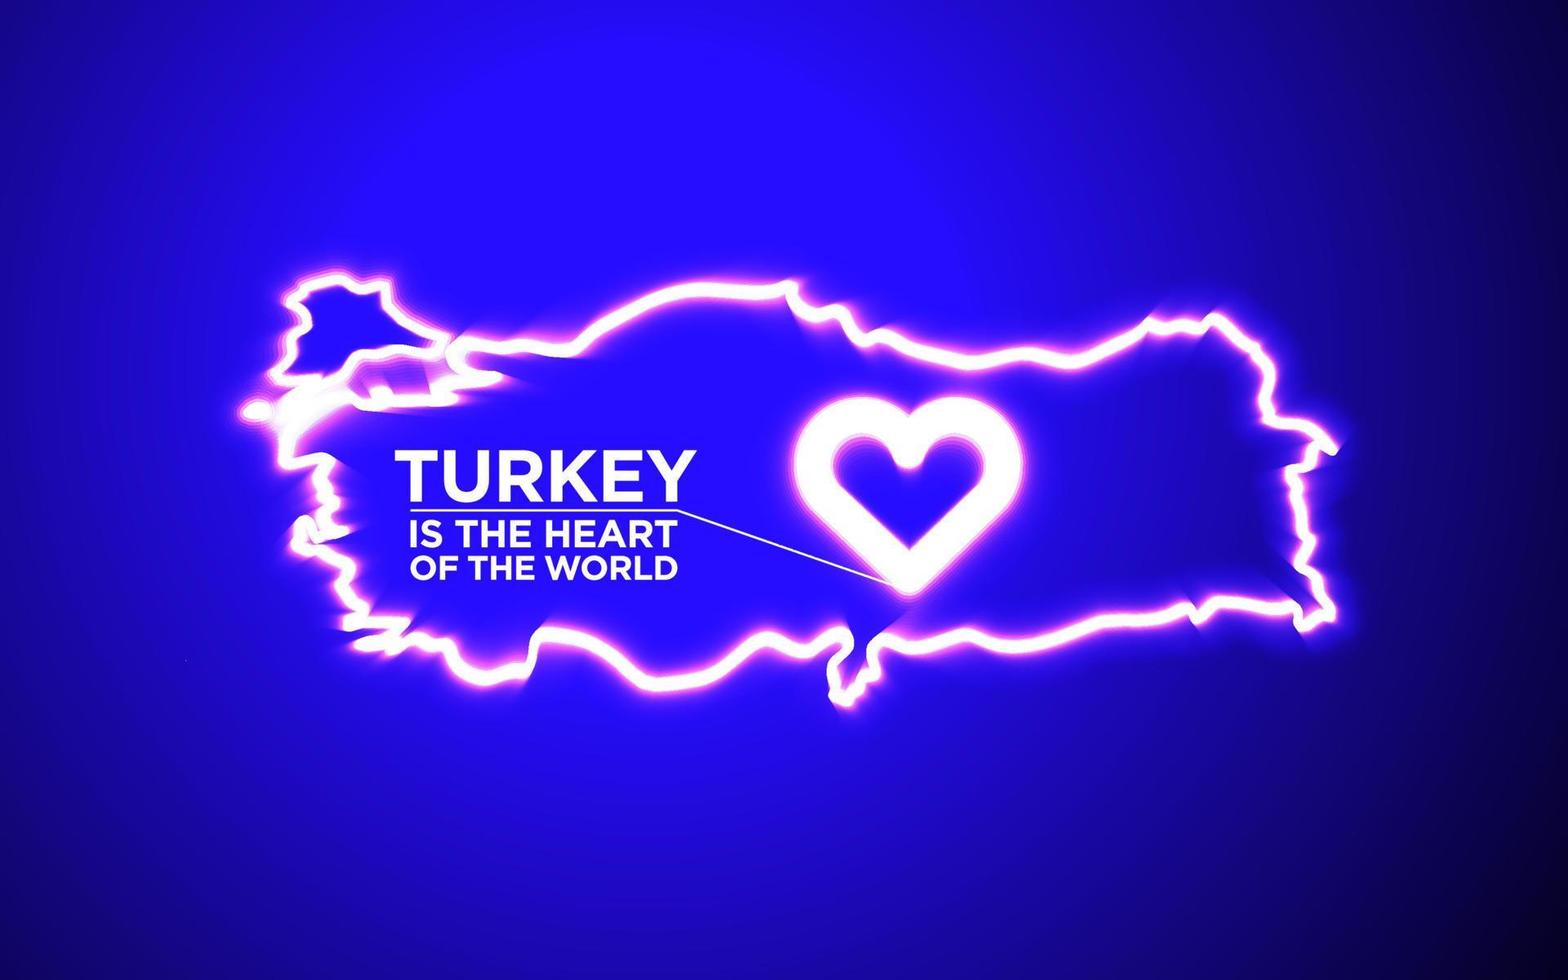 Neon heart design, Turkey is the heart of the world. Major earthquakes, floods, storms and disasters. vector